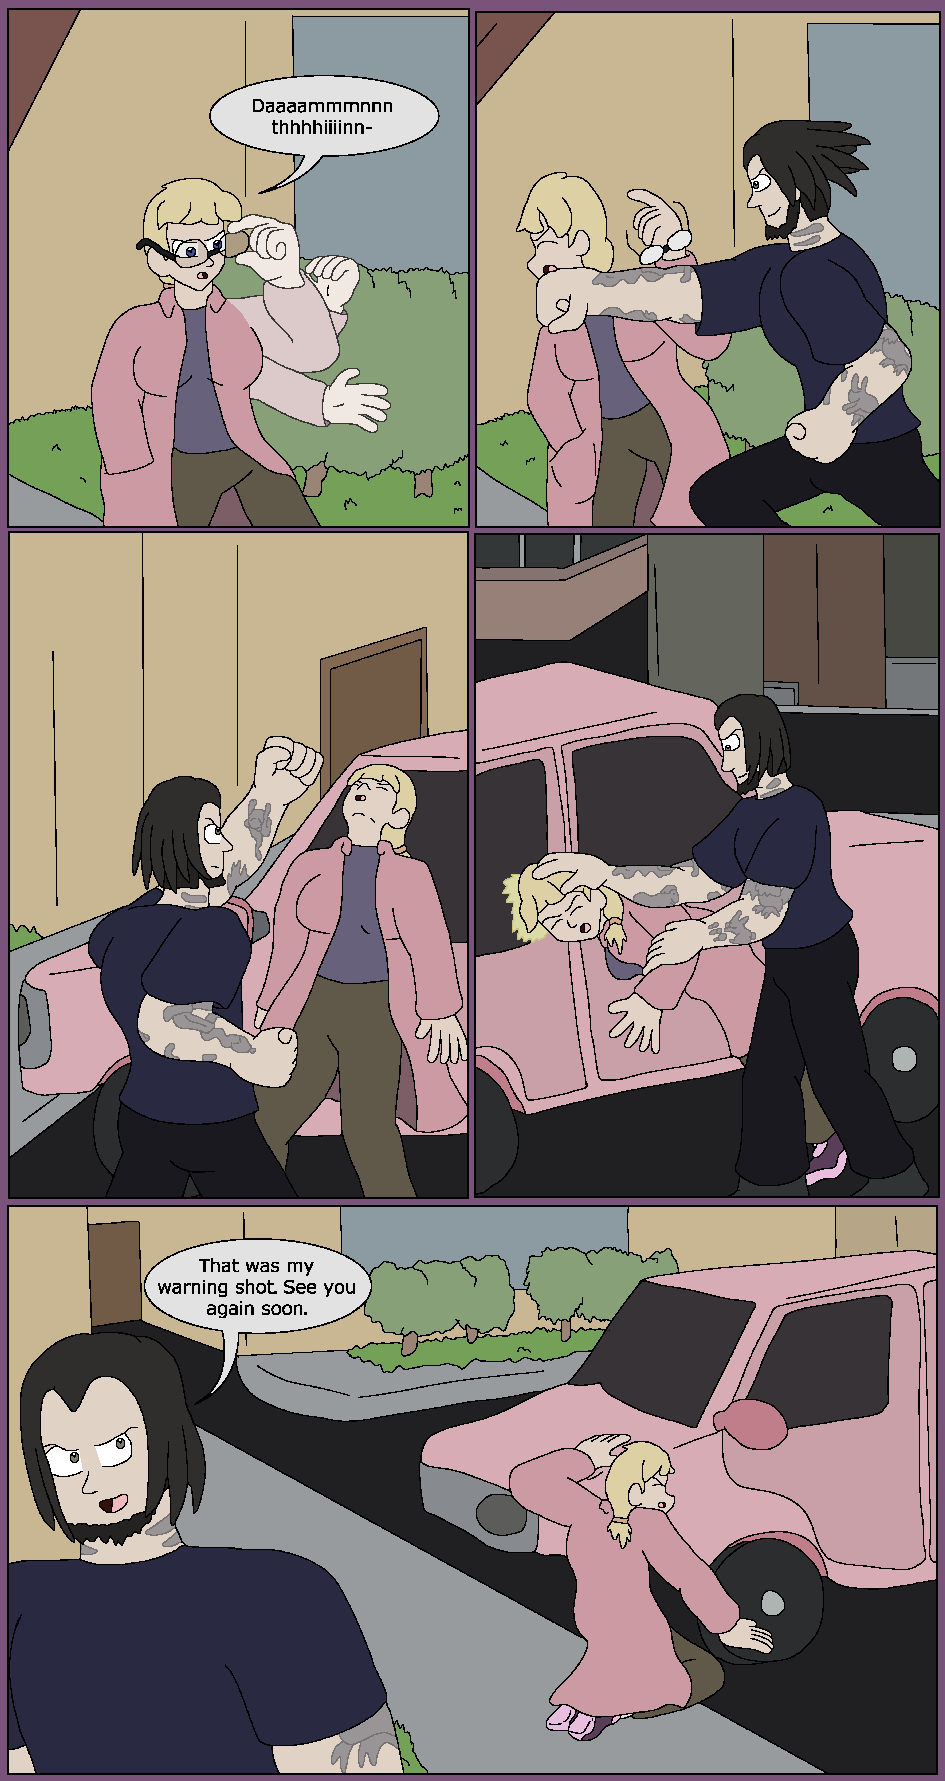 A Time For Work, Page 3